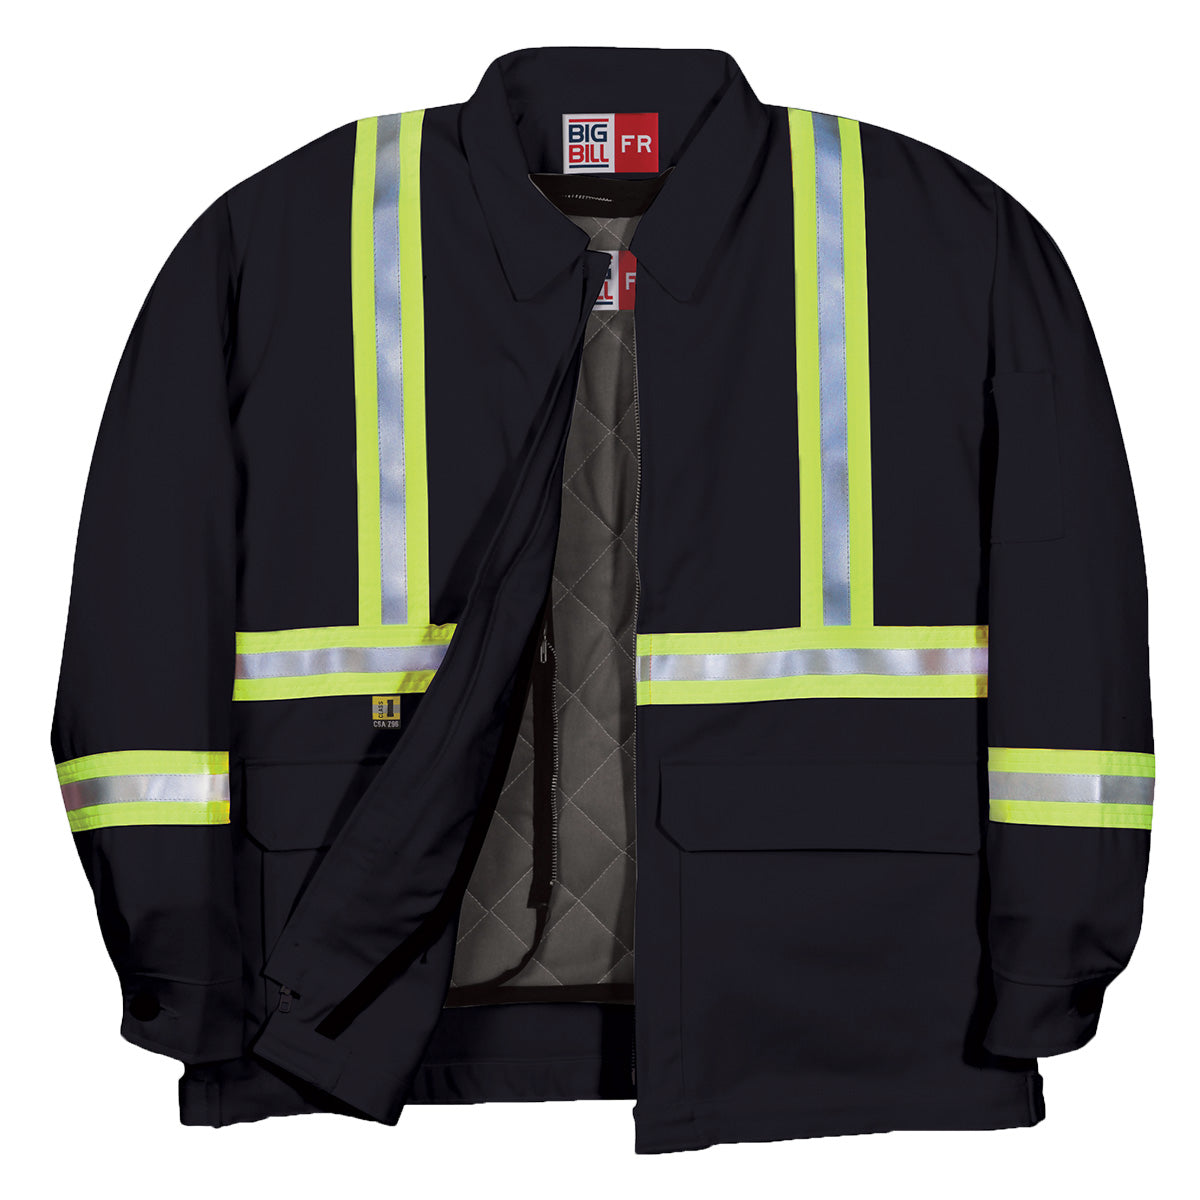 Team Jacket Zip-In Zip-Out with Reflective Material - CL345US9 